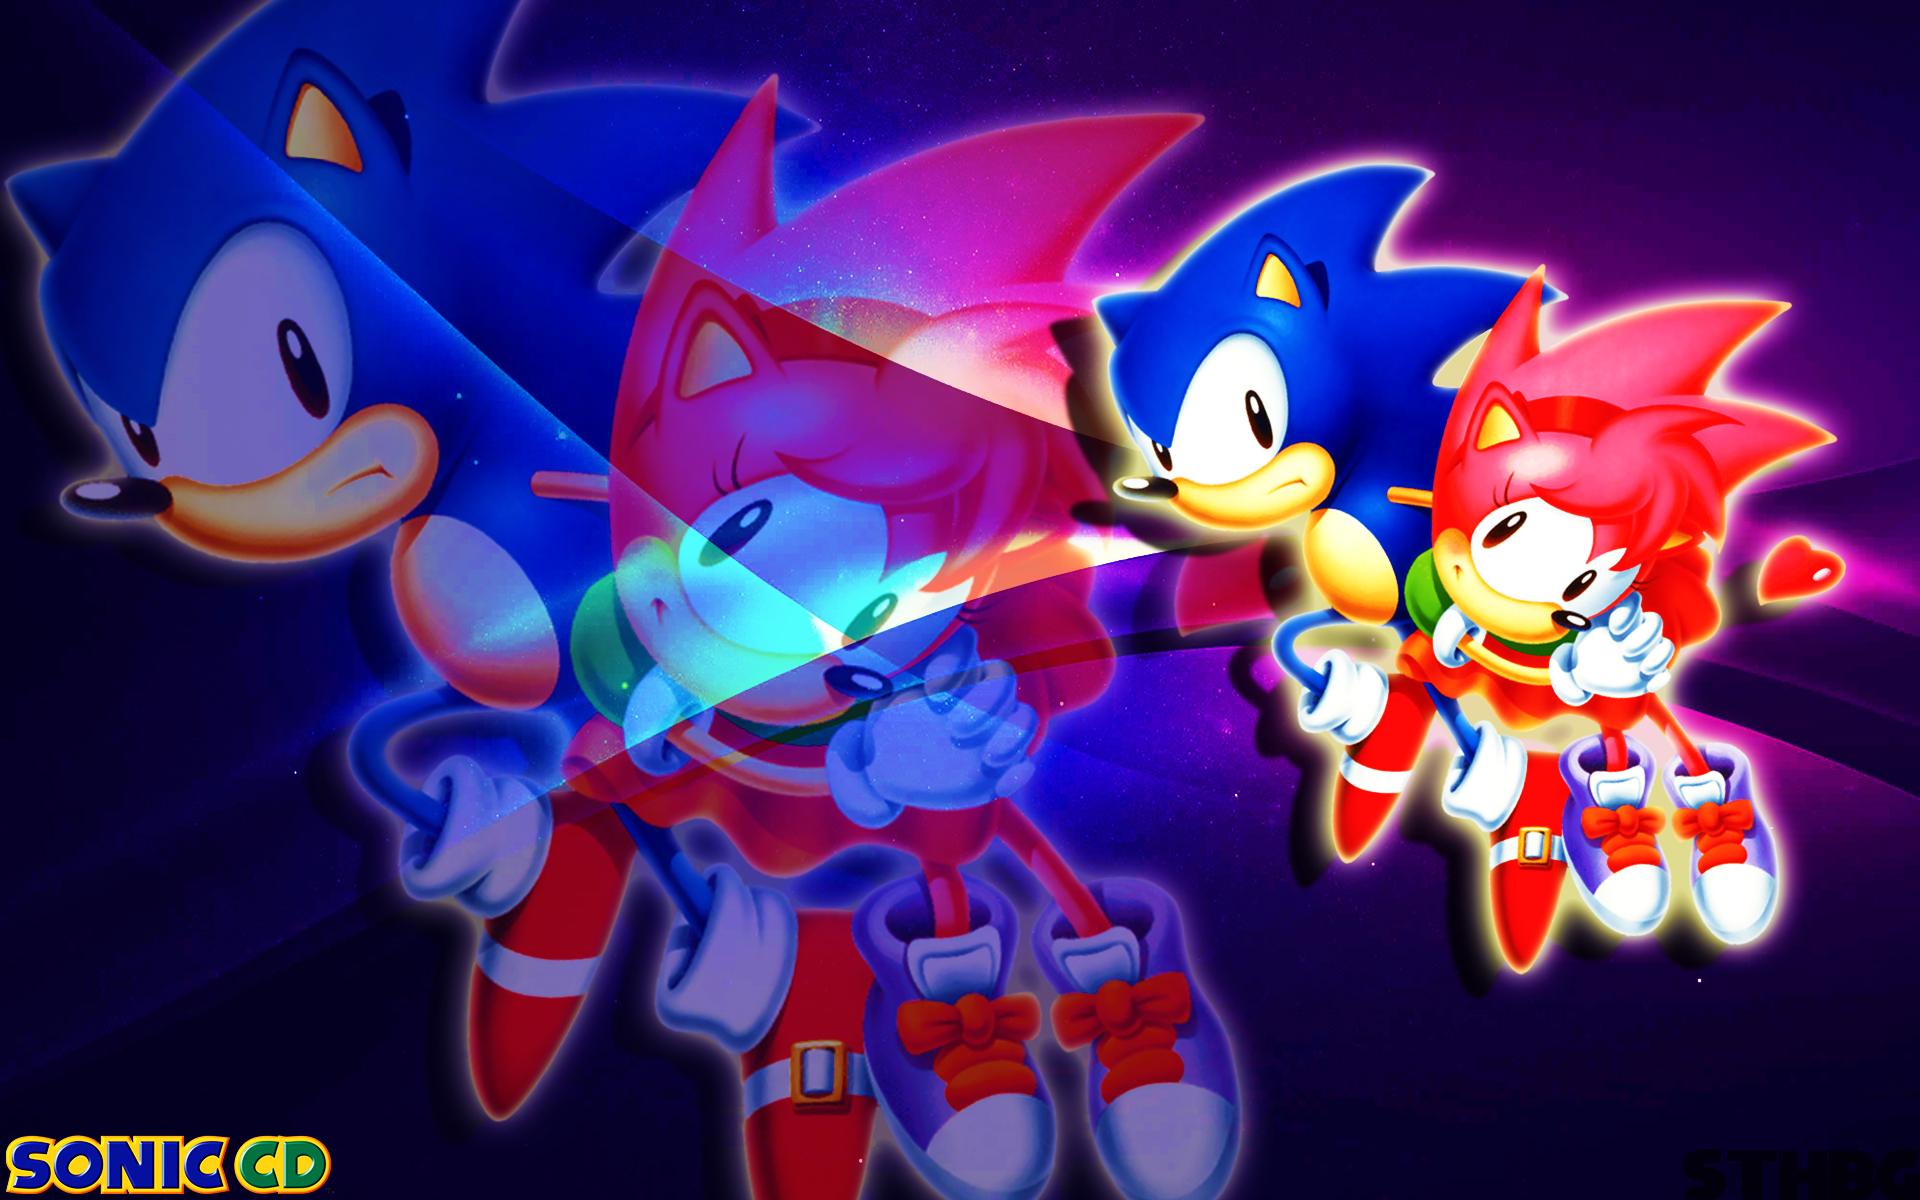 video game, sonic cd, amy rose, sonic the hedgehog, sonic